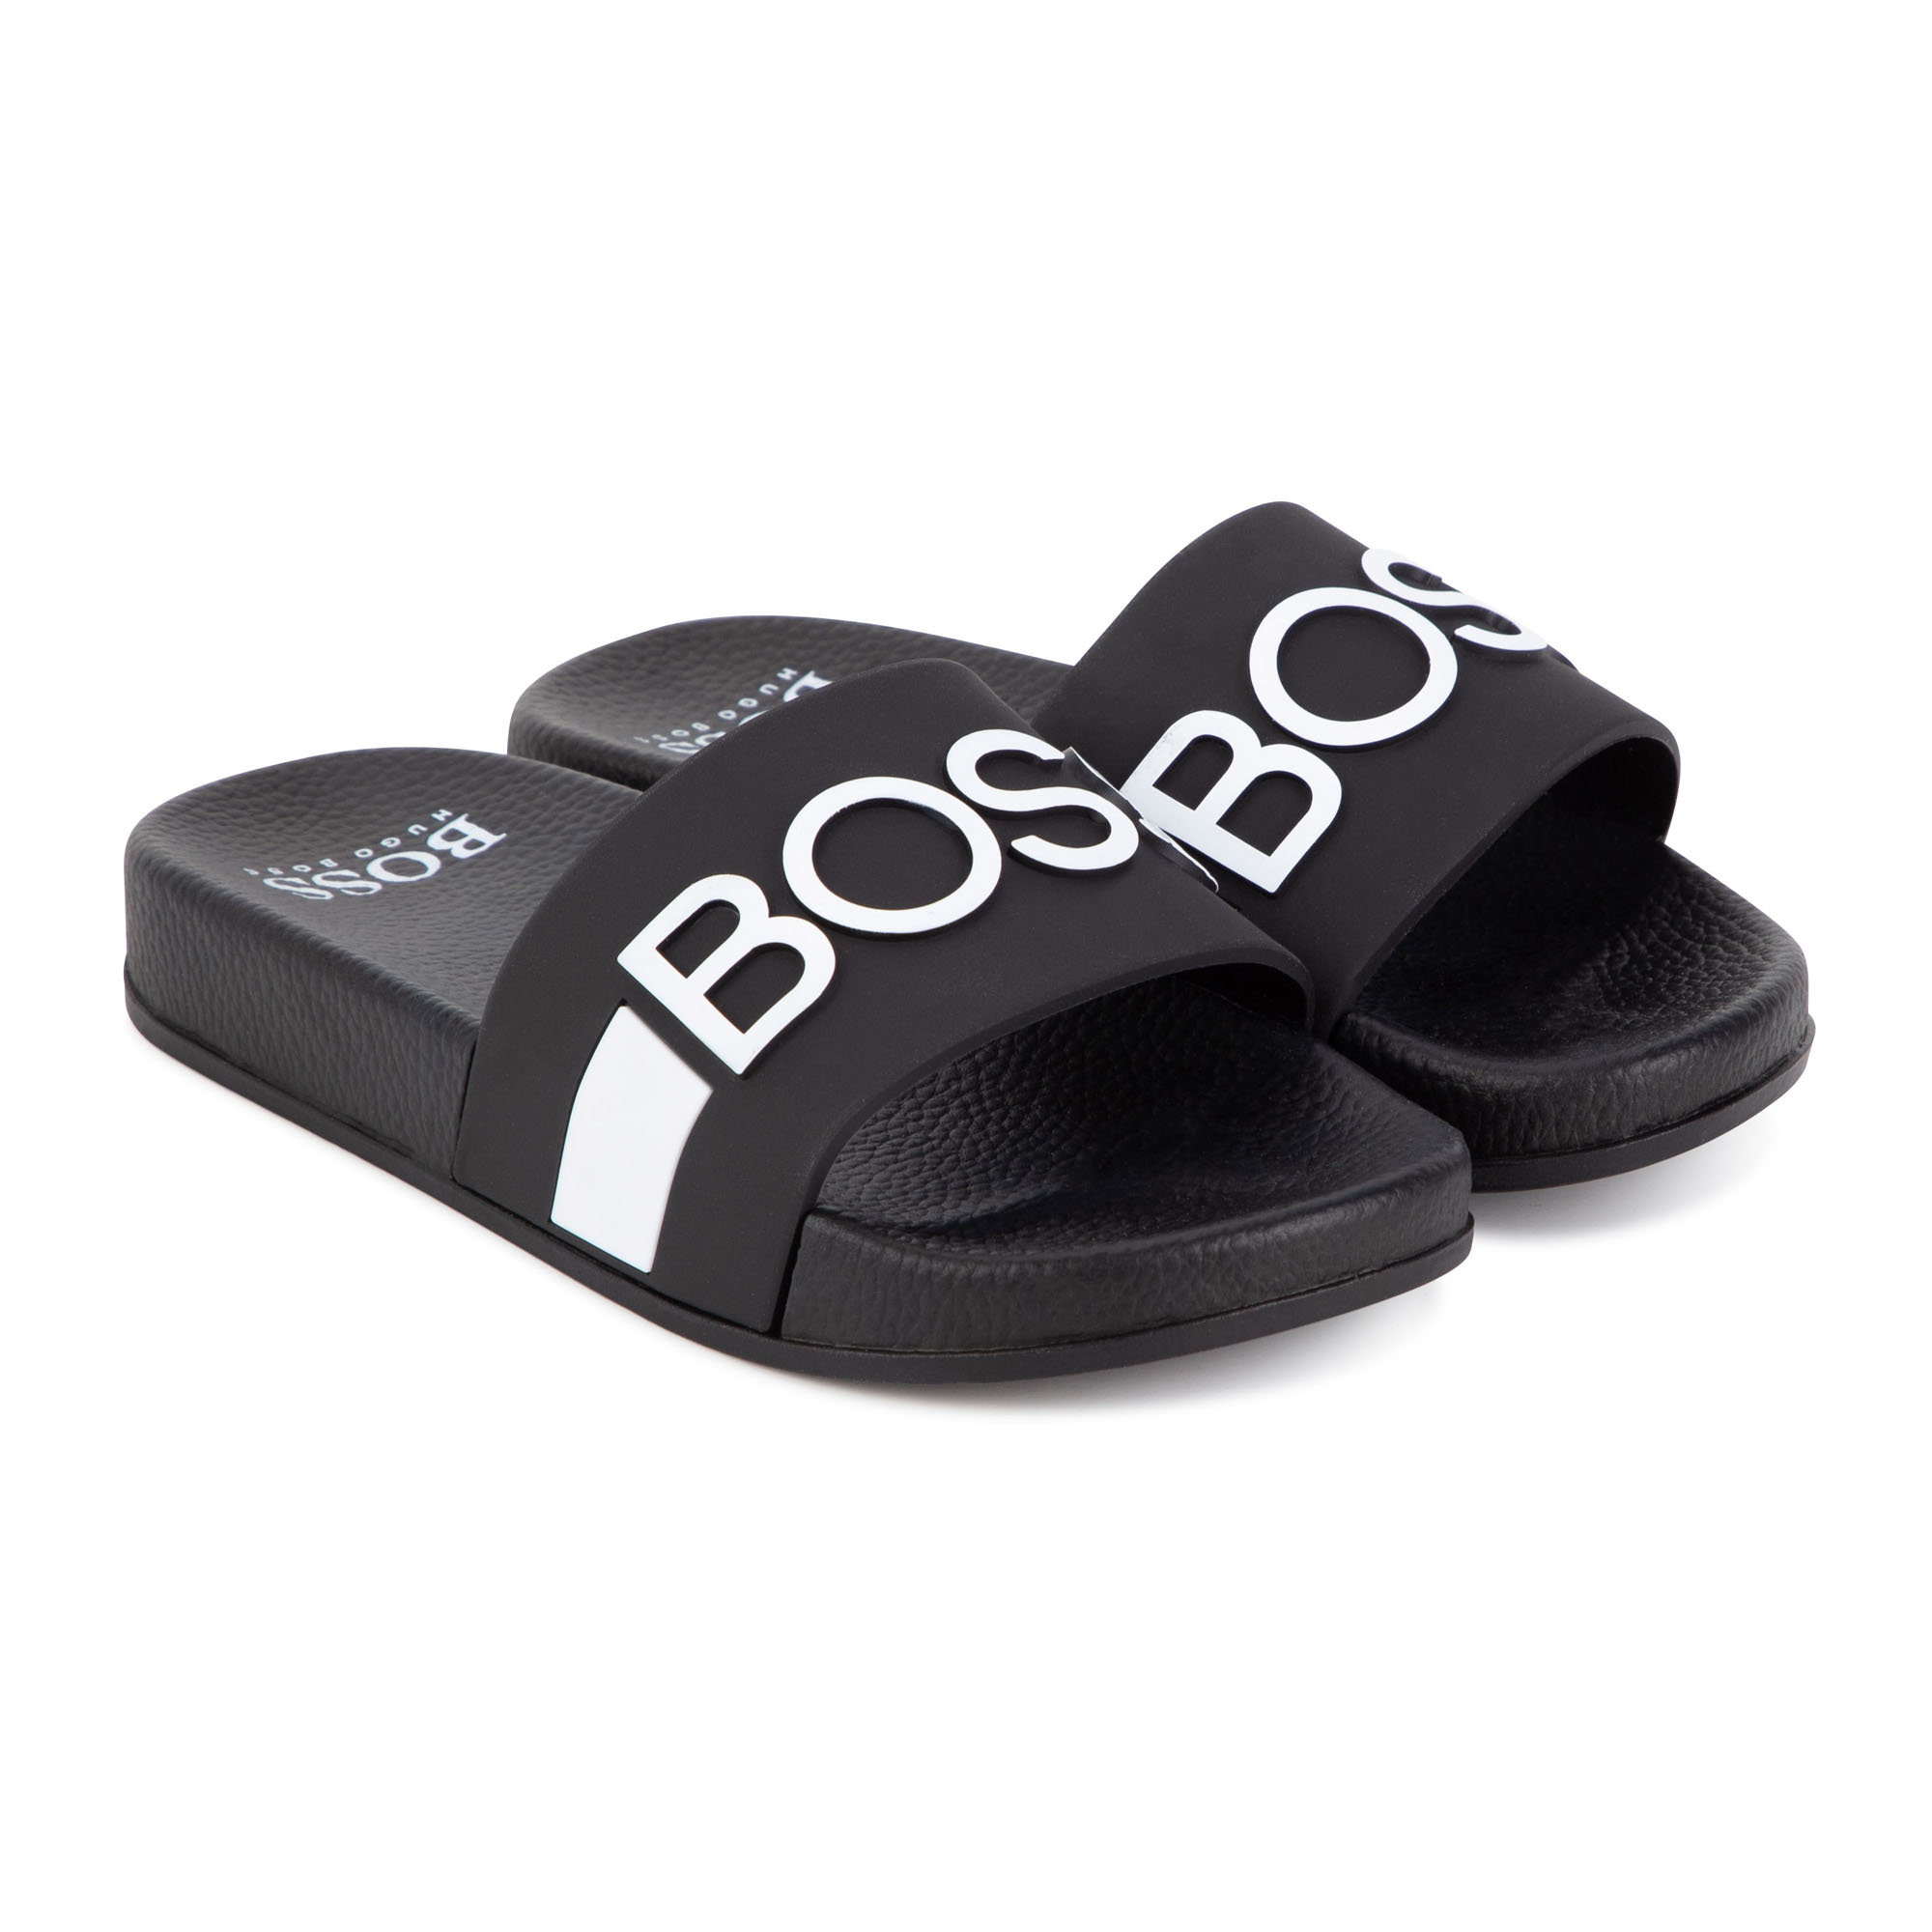 Colourful PVC sandals BOSS for BOY